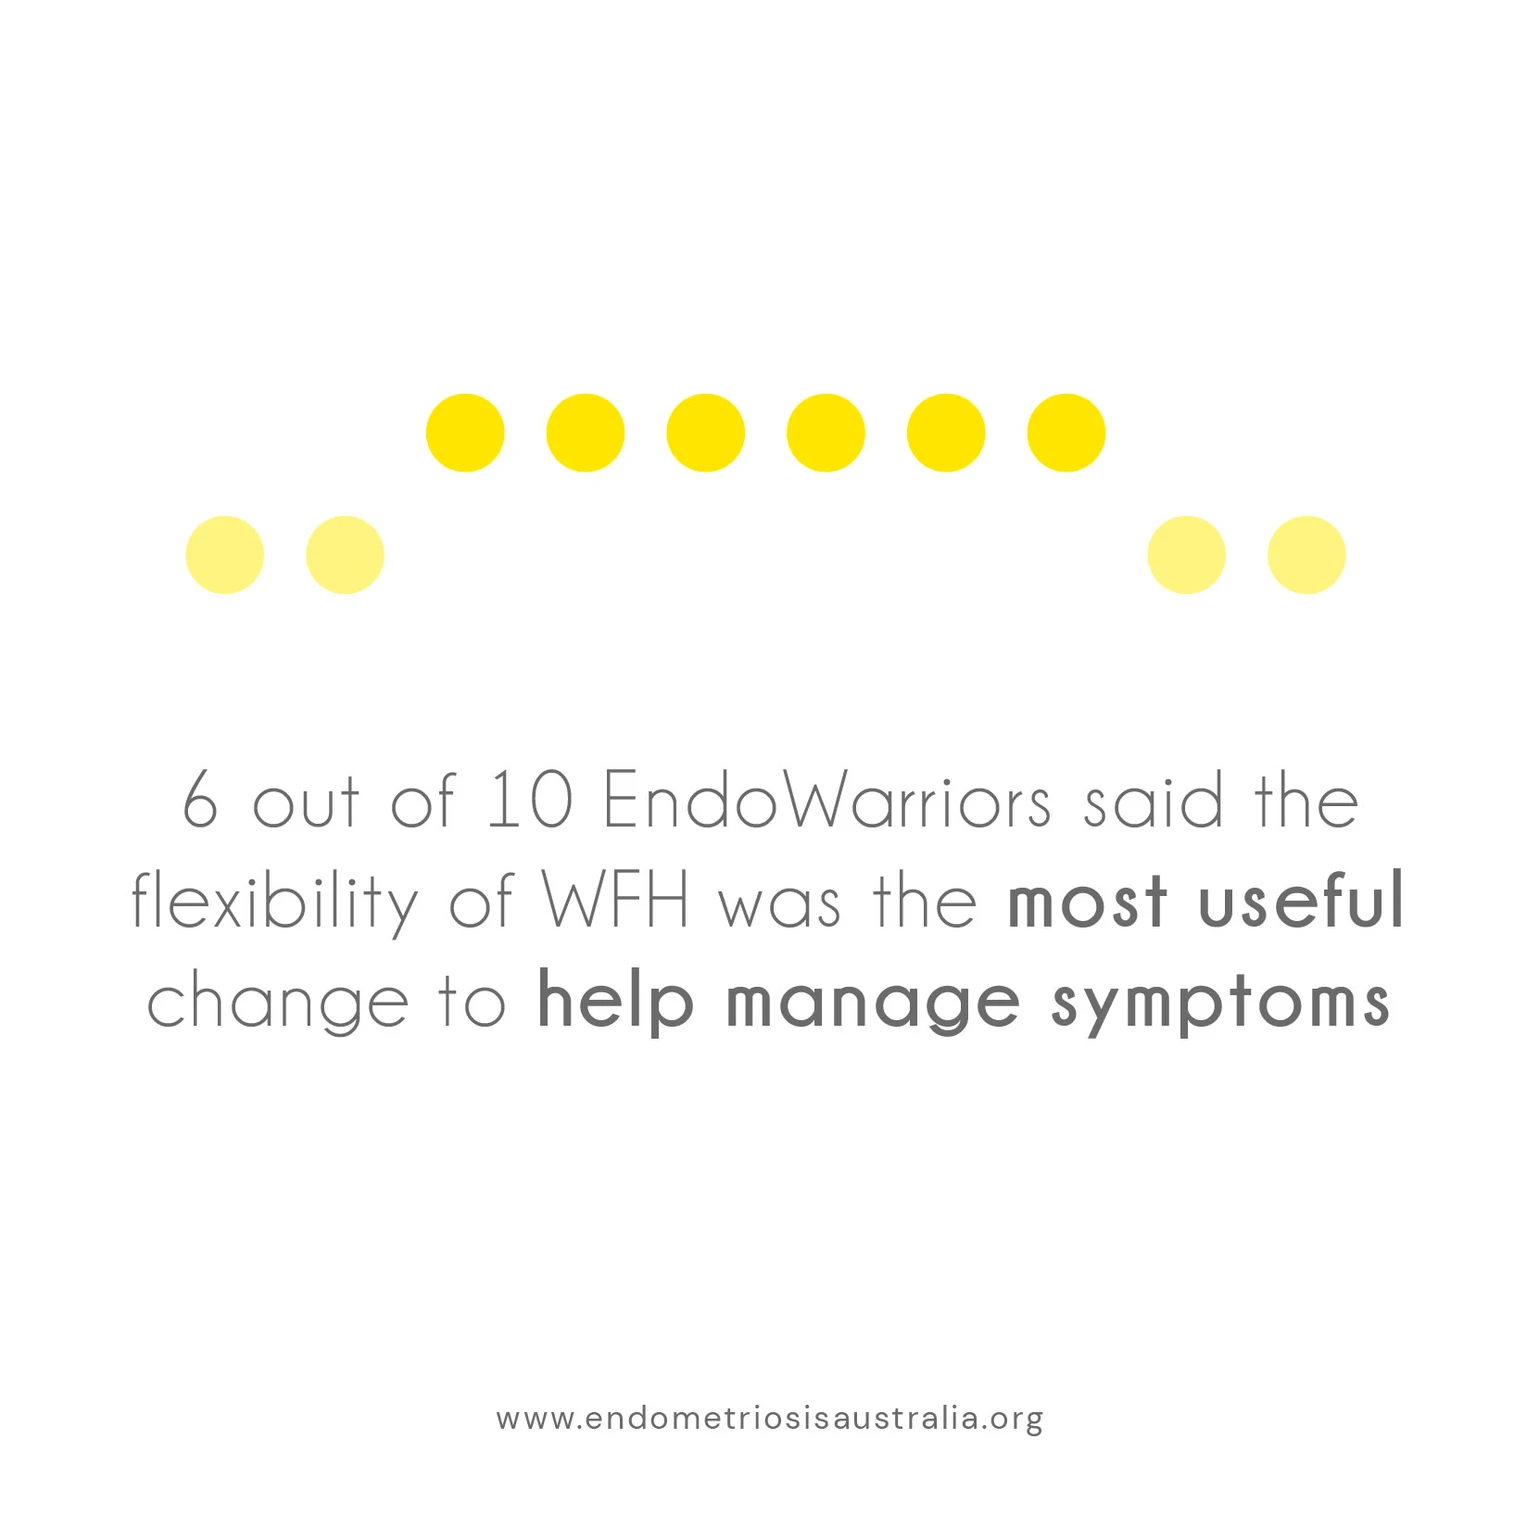 6n out of 10 Endo Warriors said the flexibility of WFH was the most useful change to help manage symptoms.